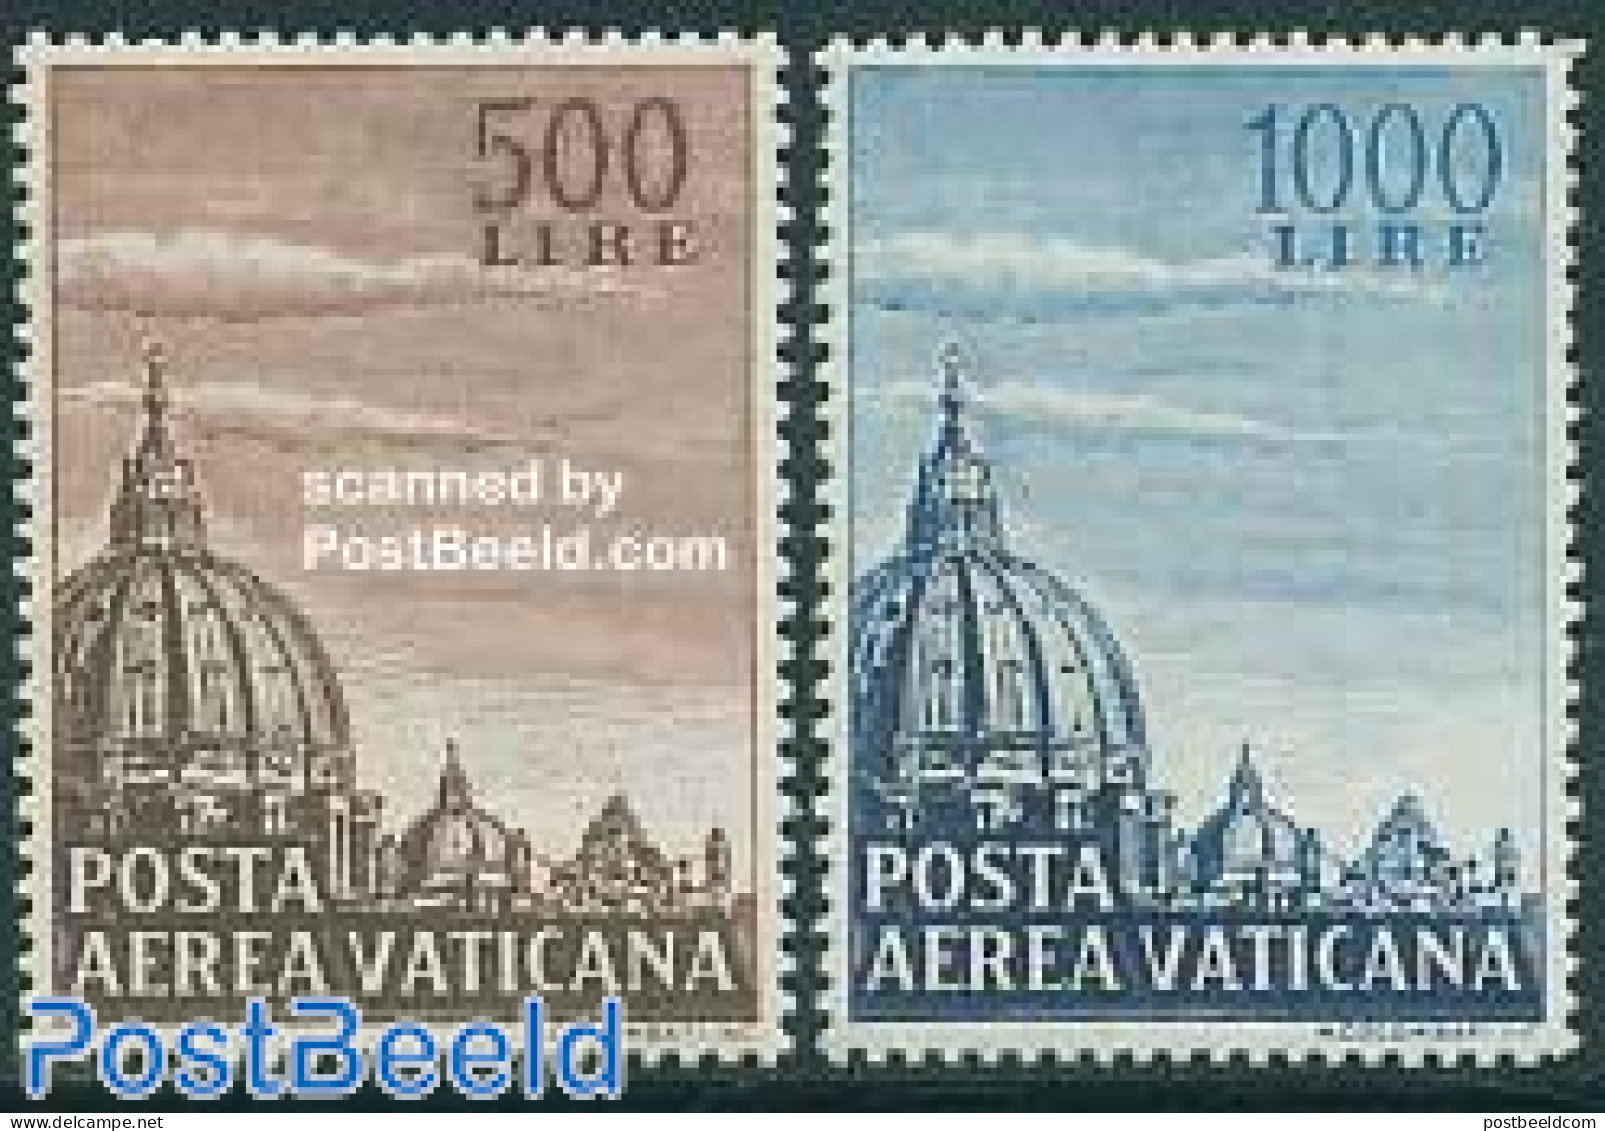 Vatican 1953 Airmail Definitives 2v, Mint NH, Religion - Churches, Temples, Mosques, Synagogues - Unused Stamps